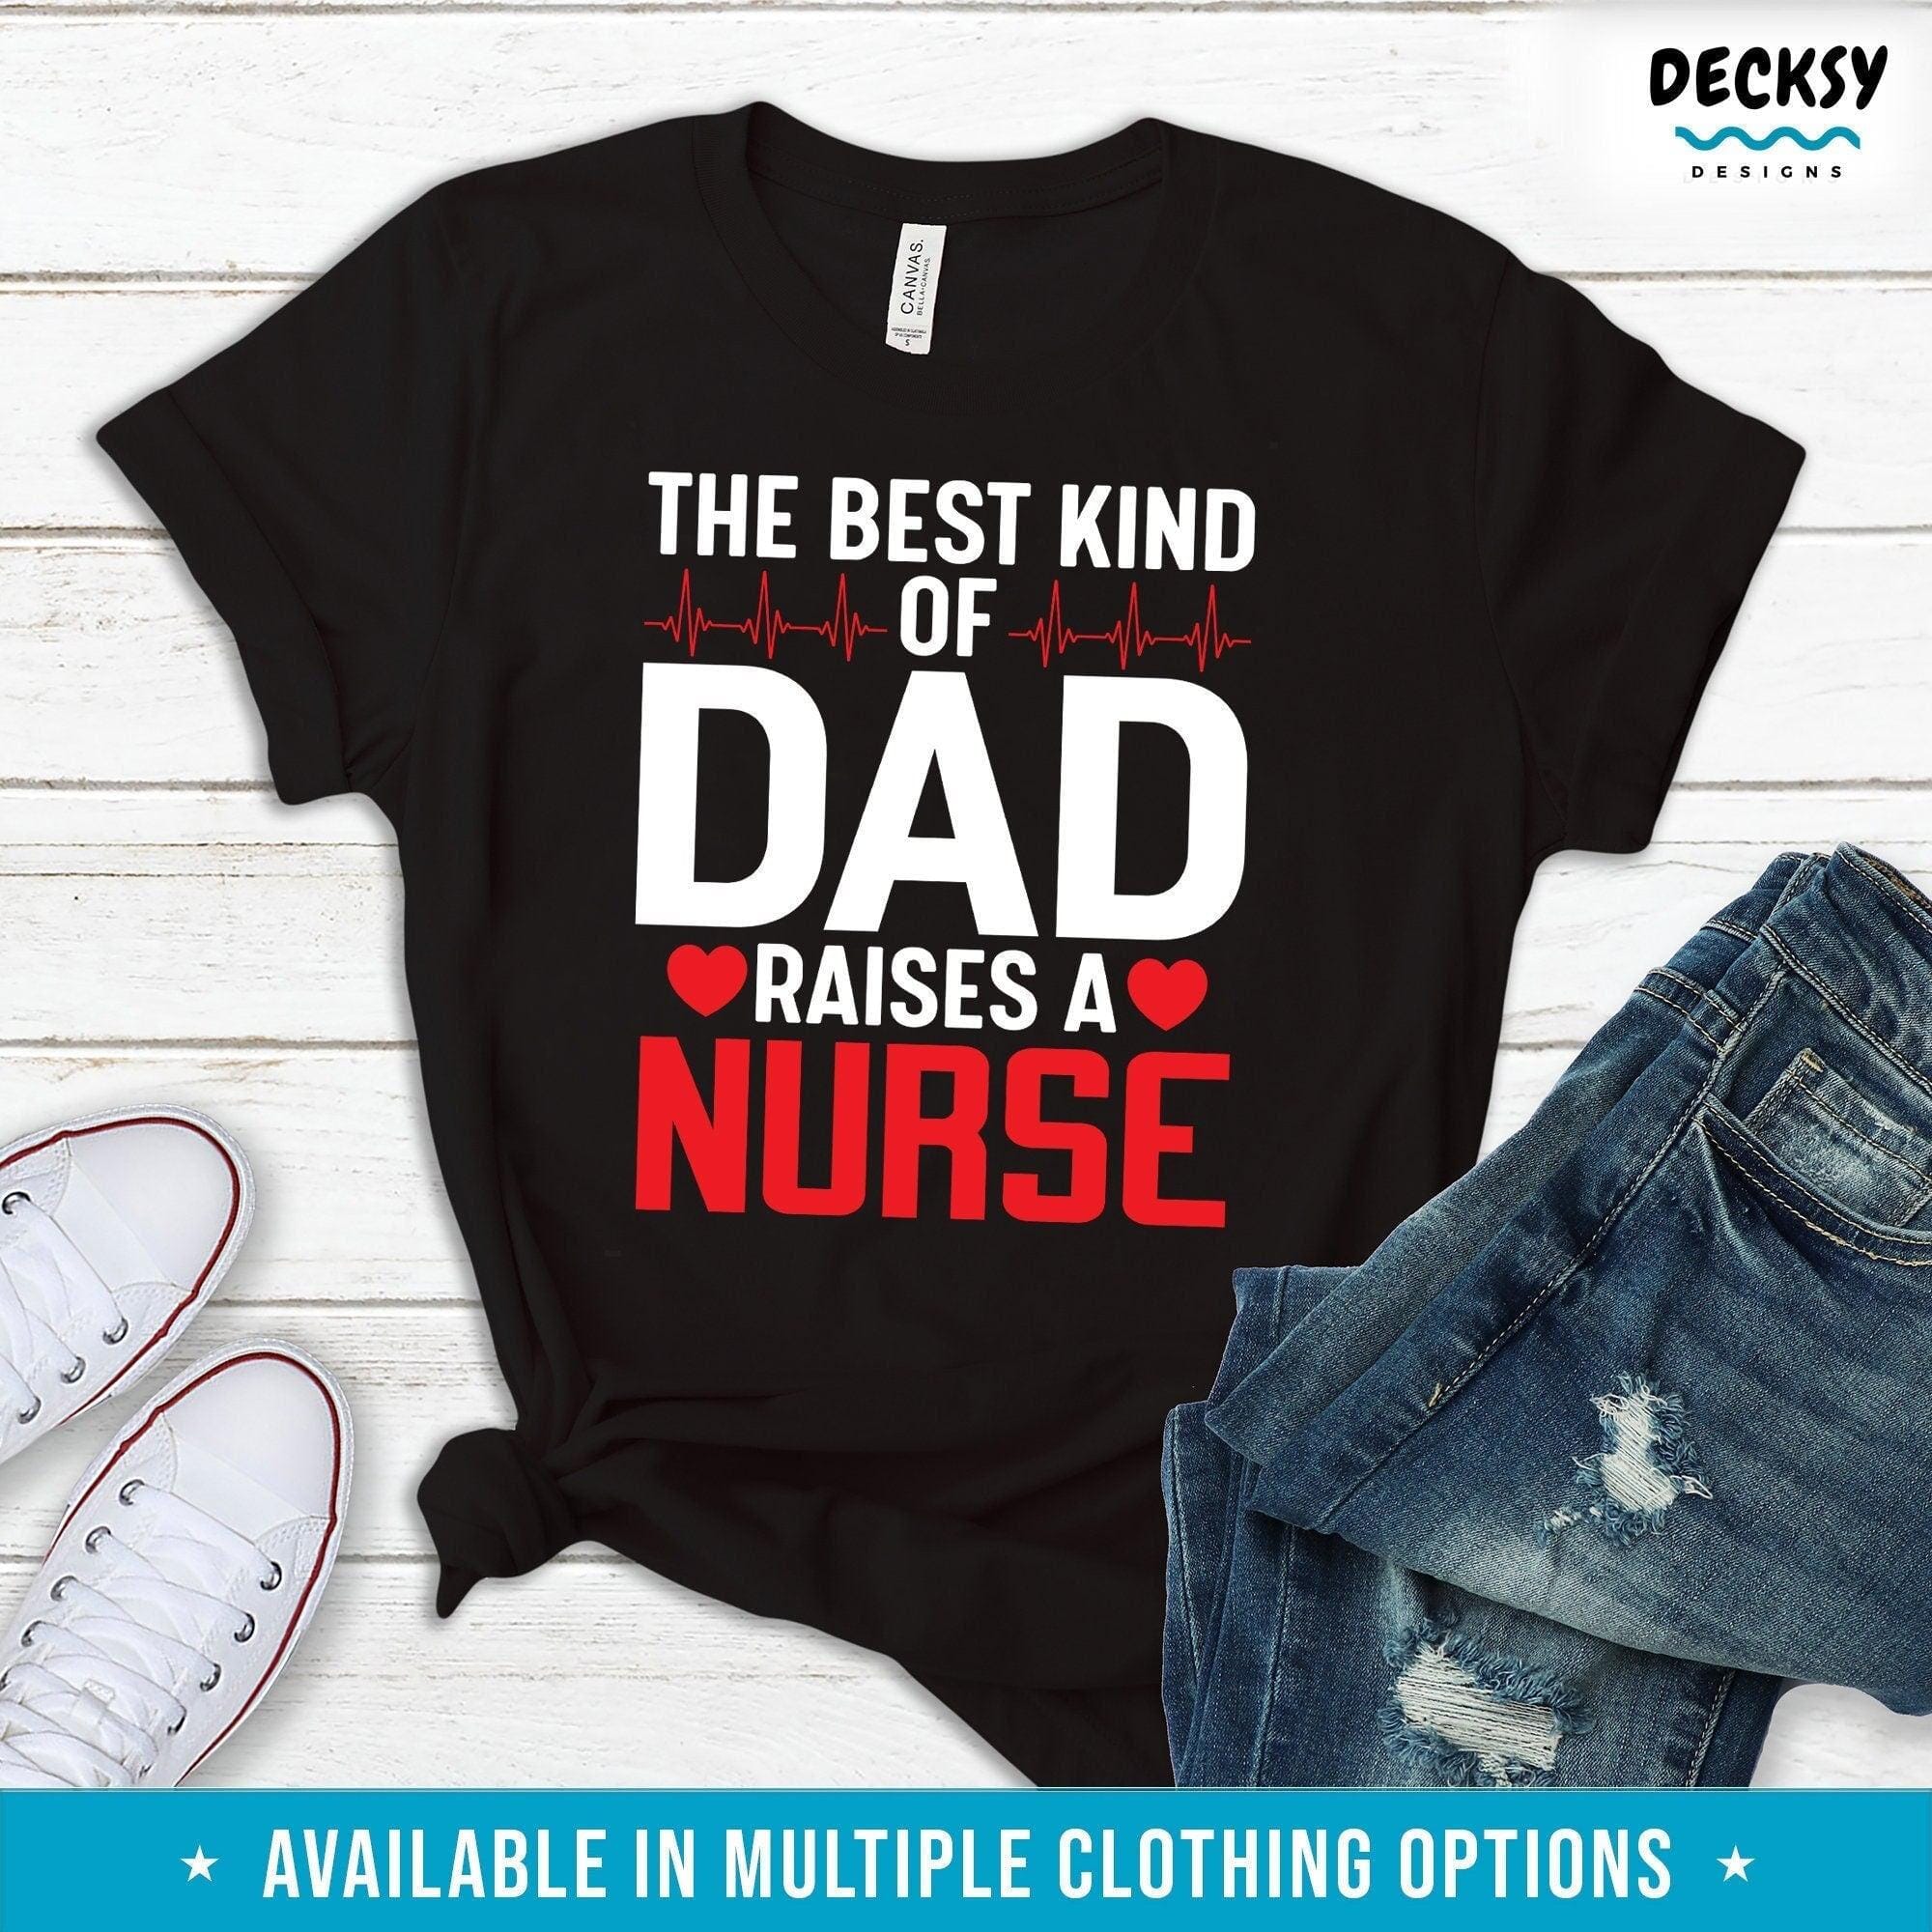 Nurse Dad Shirt, Gift From Nurse Daughter-Clothing:Gender-Neutral Adult Clothing:Tops & Tees:T-shirts:Graphic Tees-DecksyDesigns